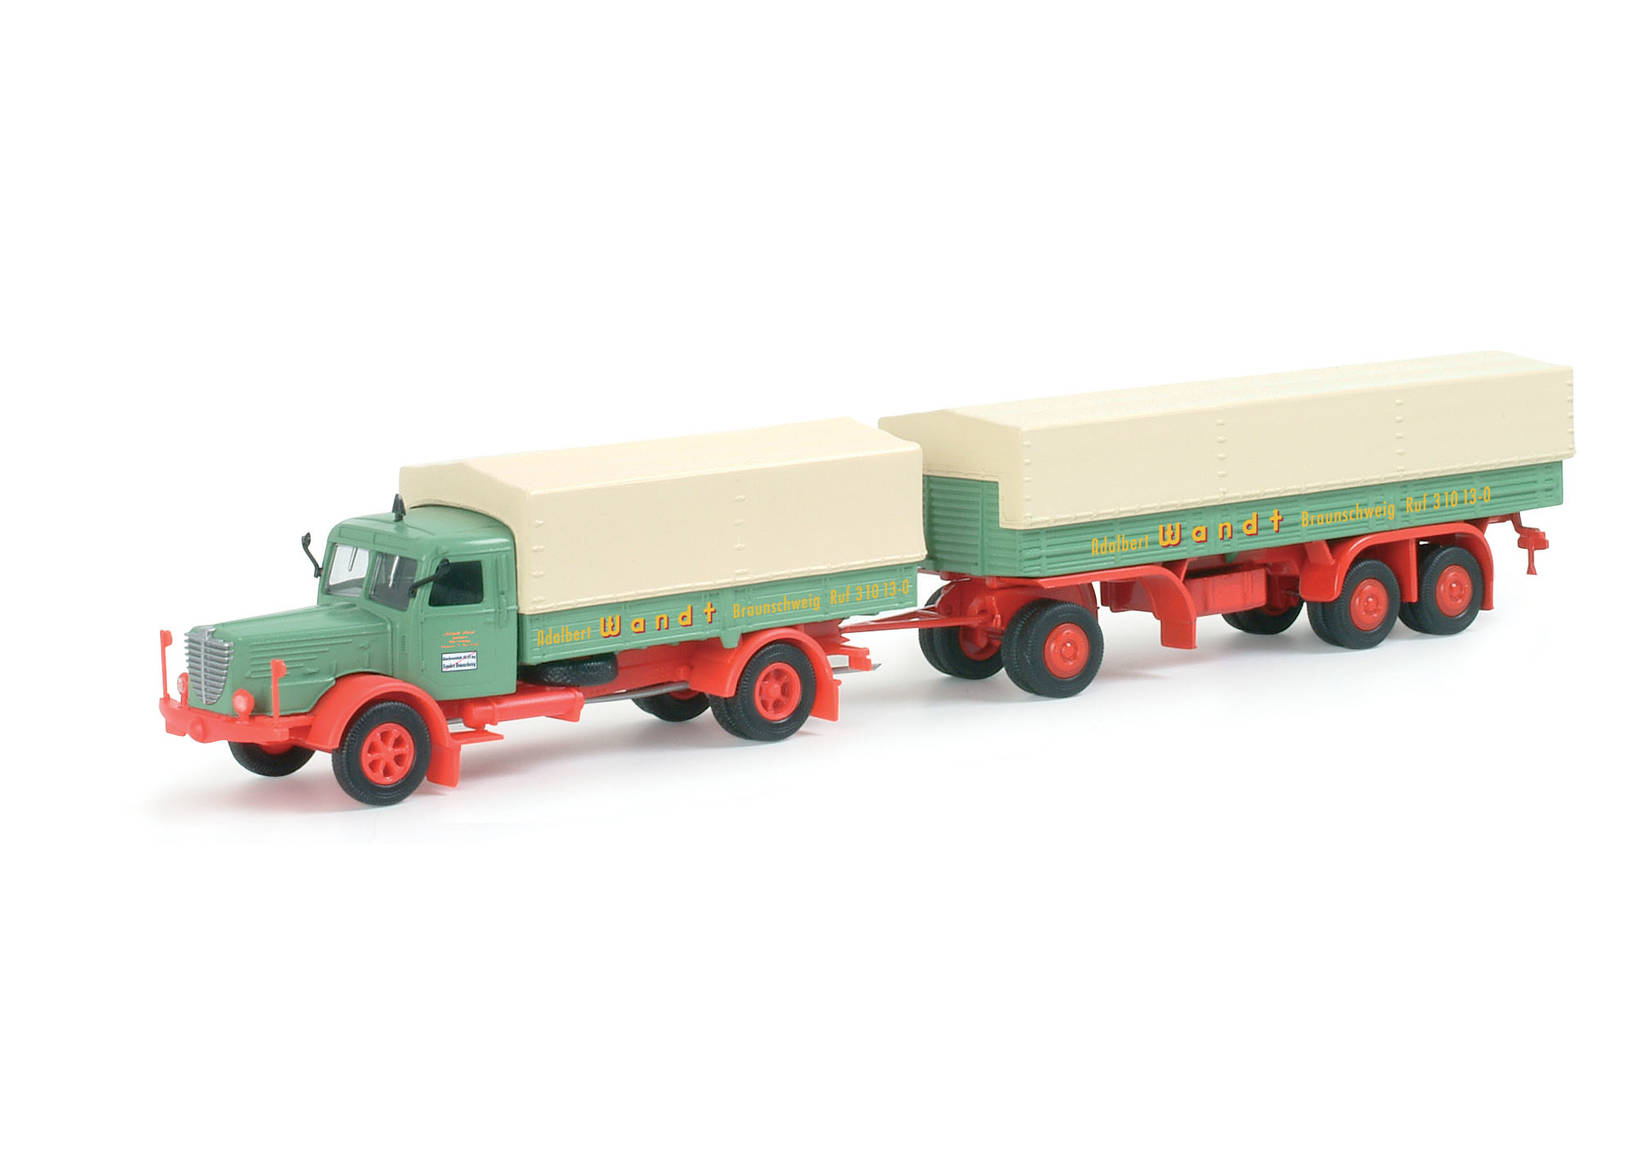 Herpa Buessing 8000 canvas cover trailer Wandt 152167